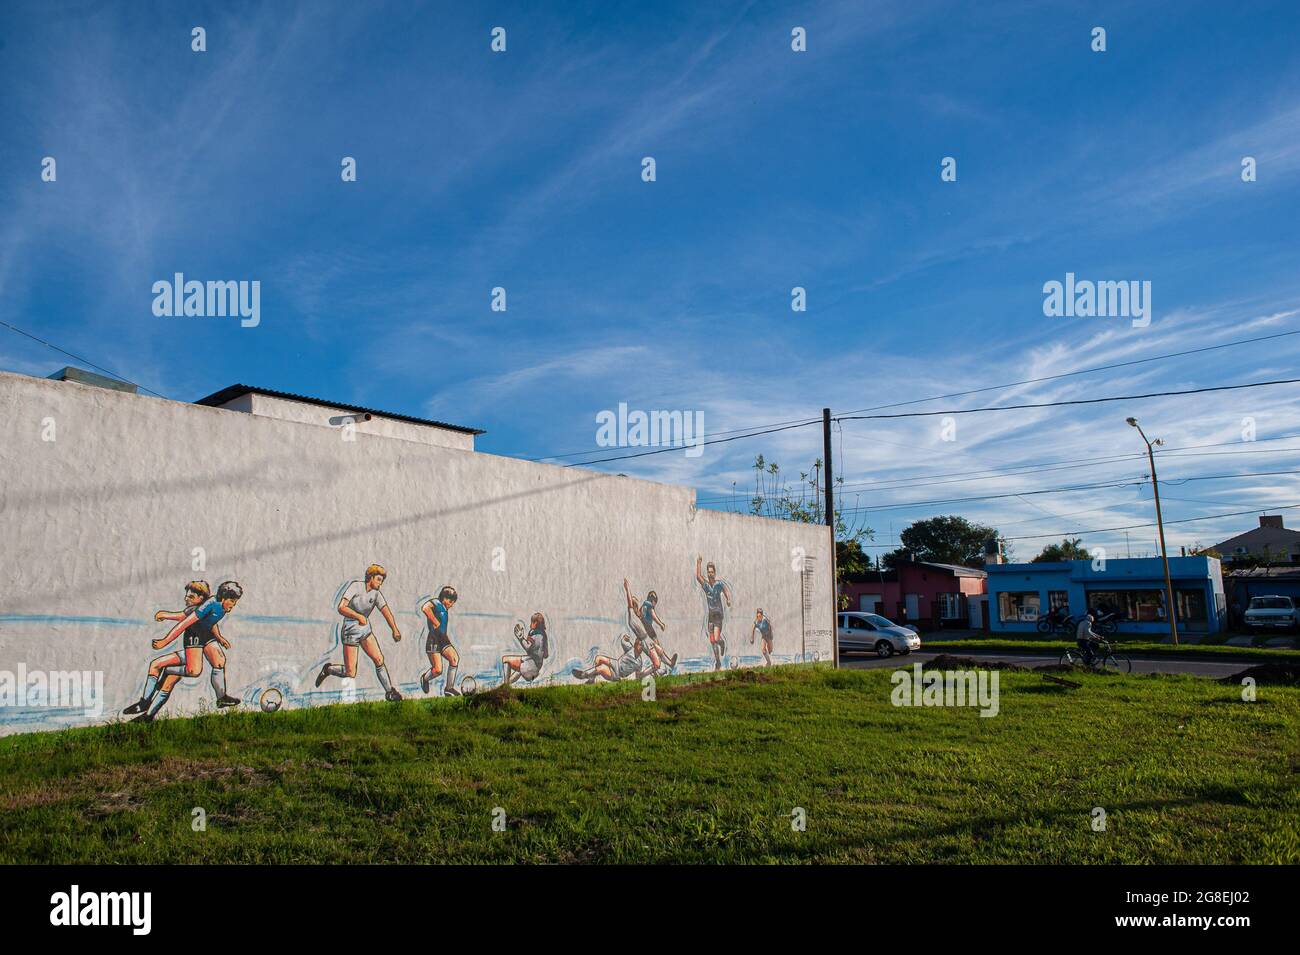 Firmat, Santa Fe, Argentina. 12th May, 2018. A mural celebrating the figure of the late football legend Diego Armando Maradona is seen in Firmat. The mural by artist Ariel Bertolotti depicts the legendary goal against the English team in Mexico 86 World Cup, with a twist: the goal isn't celebrated by Maradona but by today's star Lionel Messi. Maradona died at the age of 60 on November 25, 2020 of severe heart failure in circumstances that are still under investigation. (Credit Image: © Patricio Murphy/SOPA Images via ZUMA Press Wire) Stock Photo